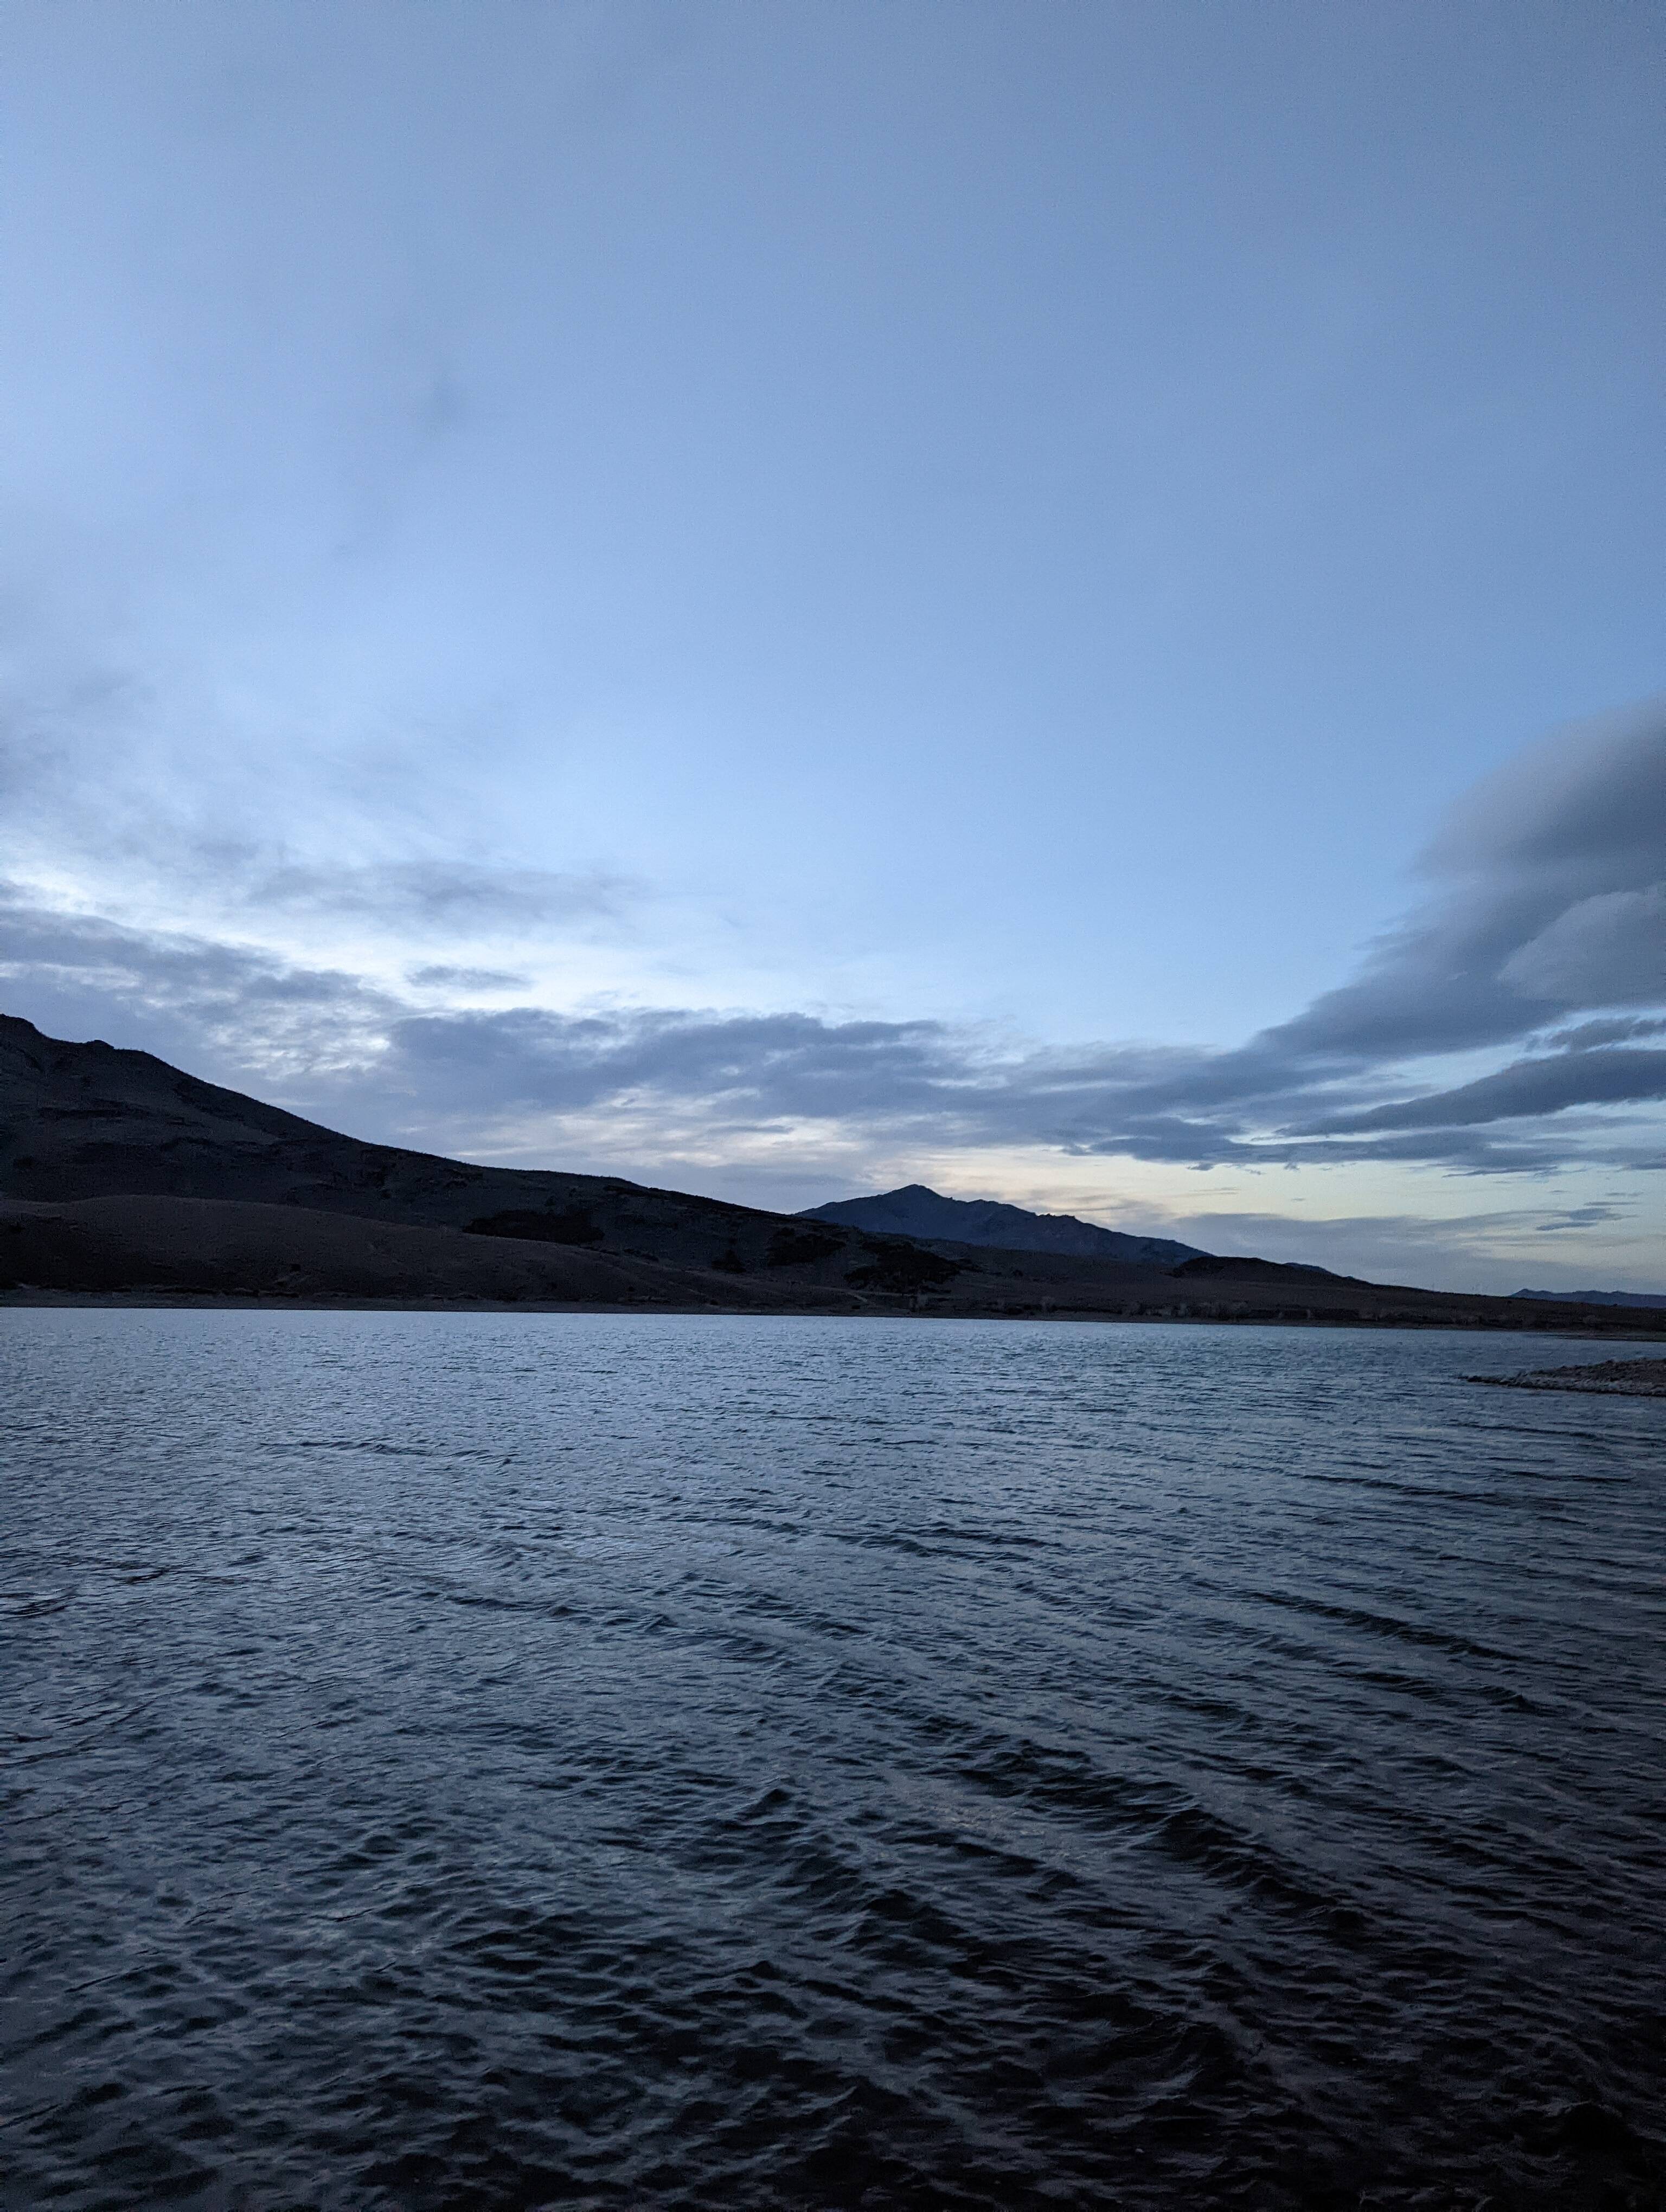 lake and mountains in fading light